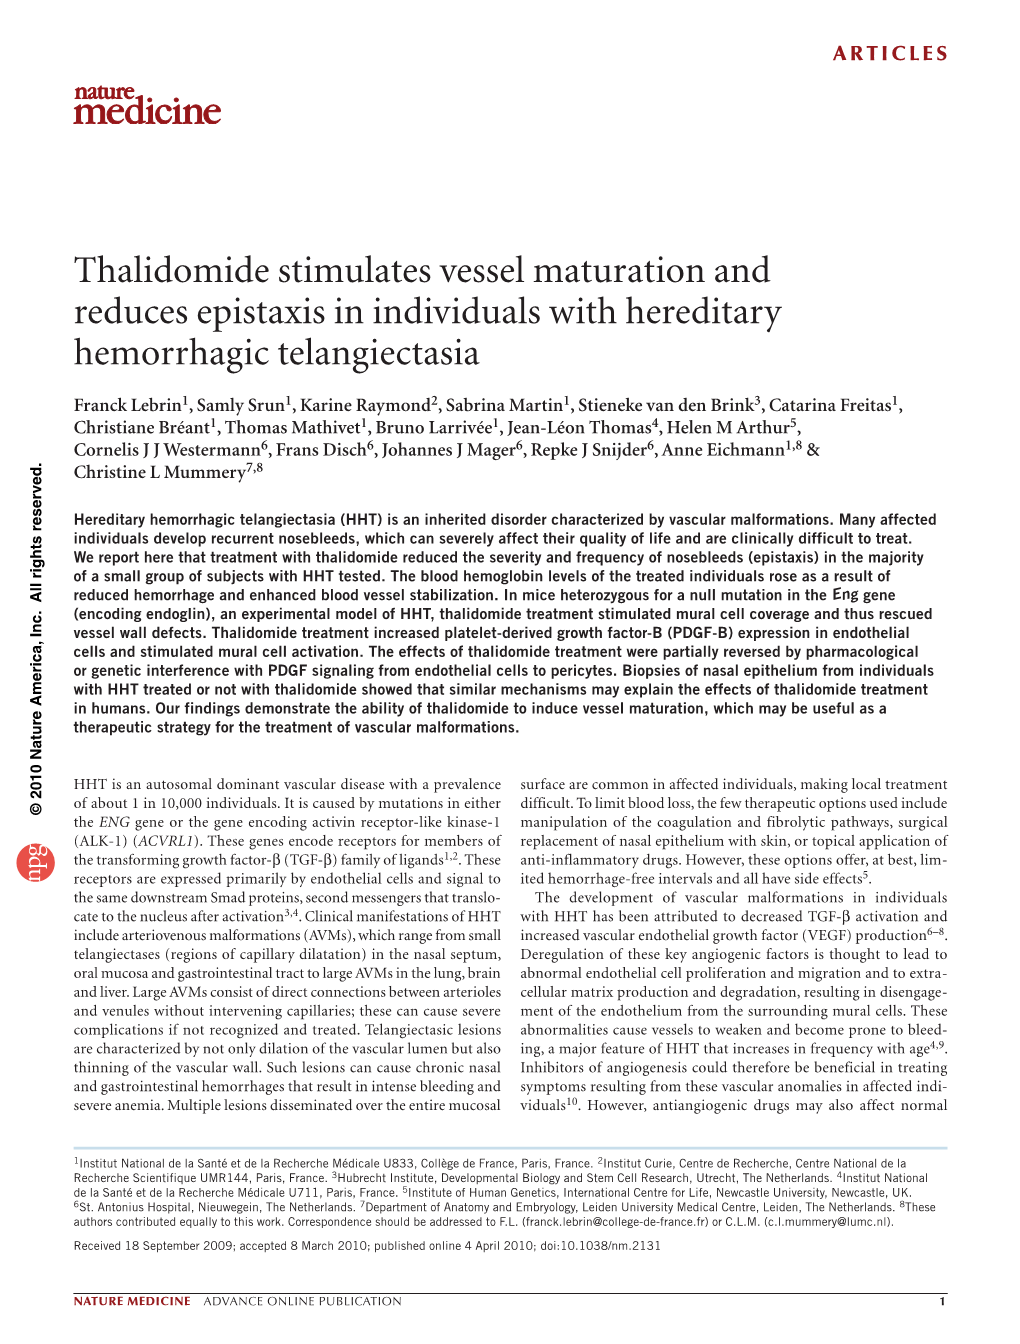 Thalidomide Stimulates Vessel Maturation and Reduces Epistaxis in Individuals with Hereditary Hemorrhagic Telangiectasia